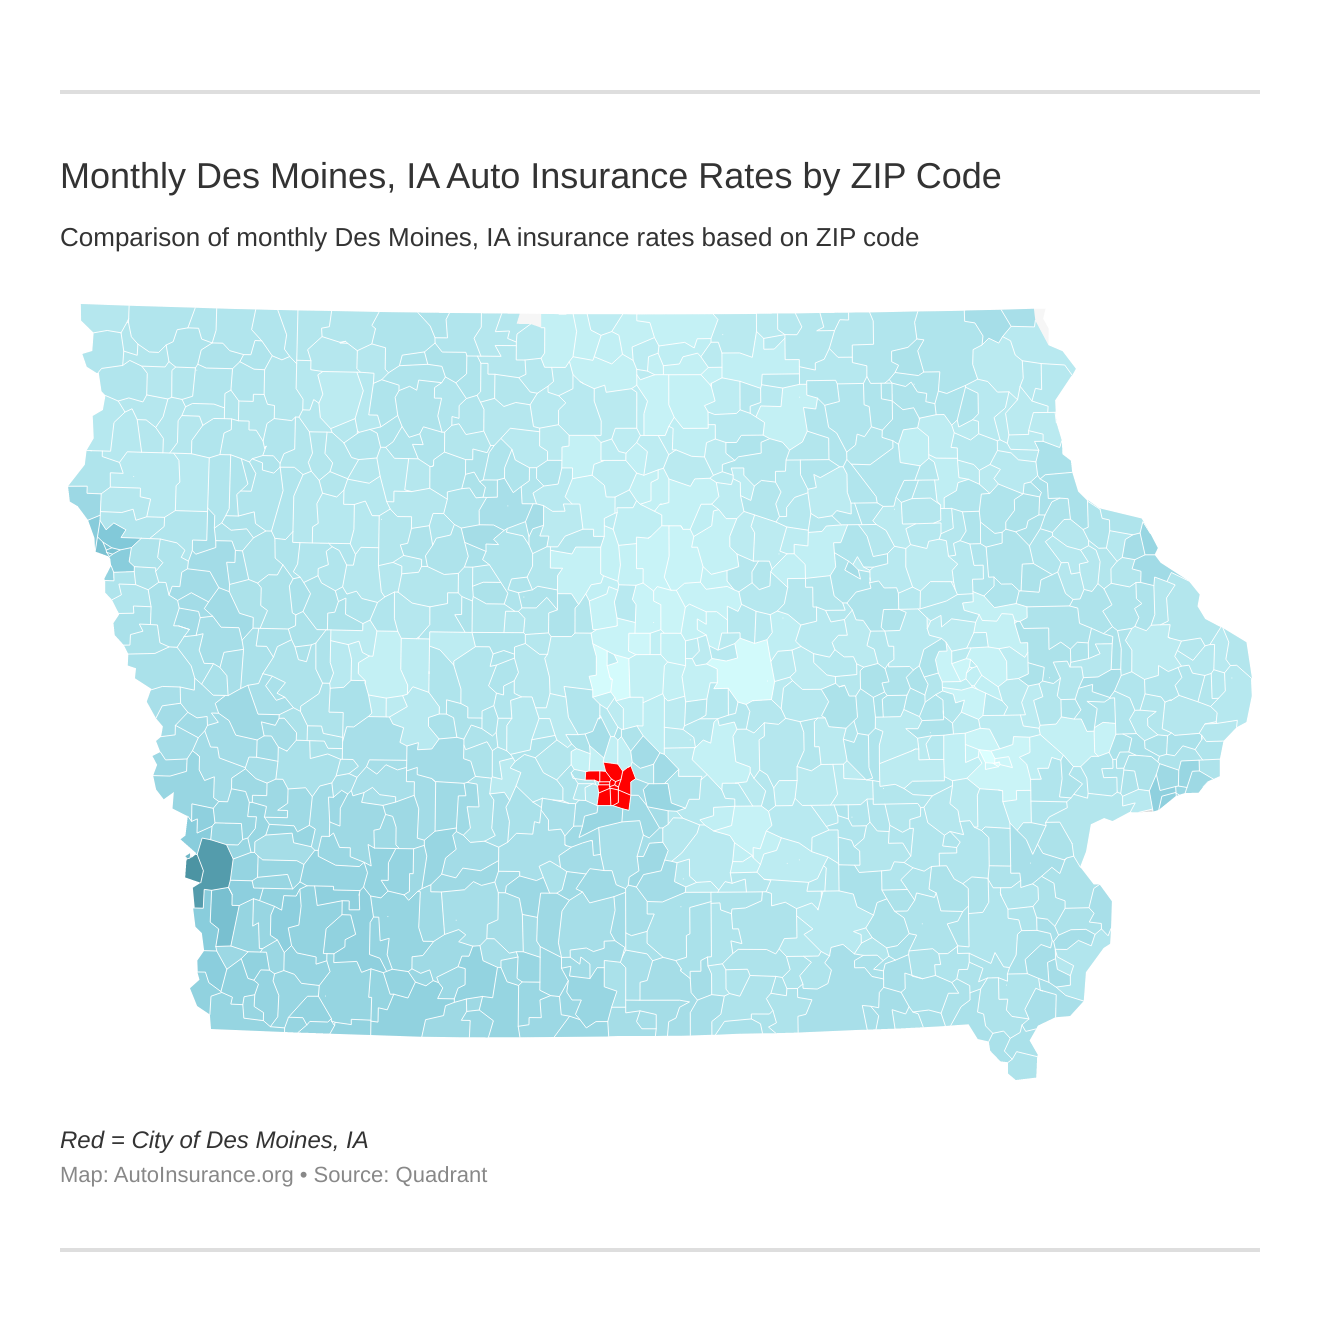 Monthly Des Moines, IA Auto Insurance Rates by ZIP Code